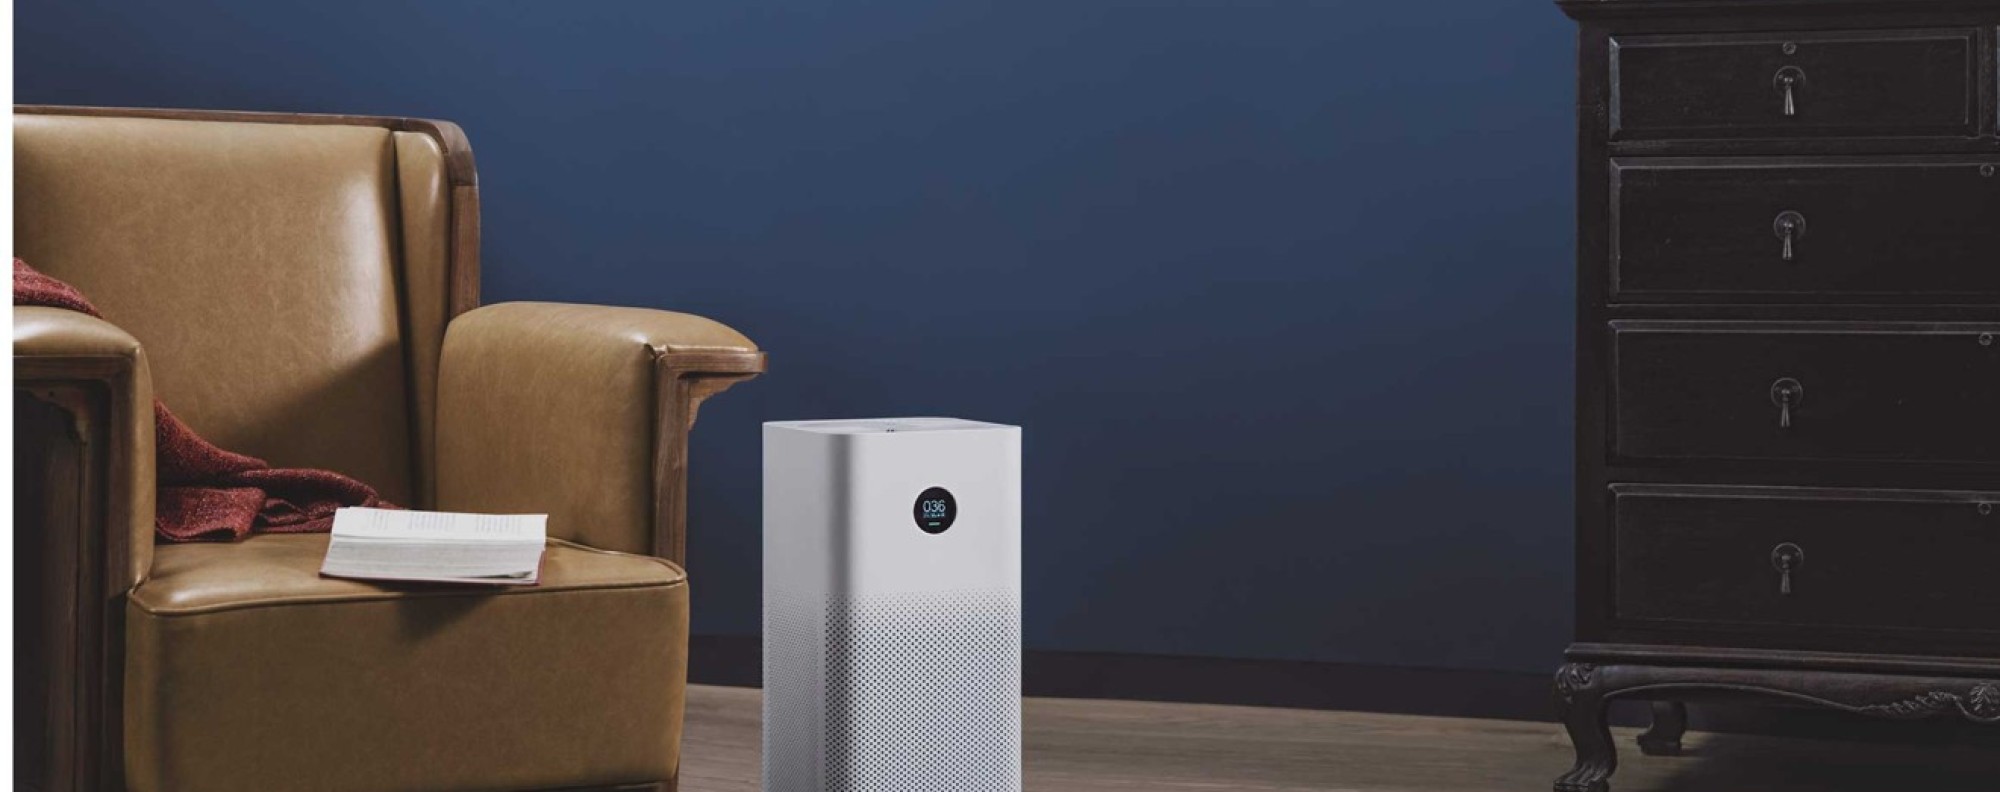 Xiaomi Mi Air Purifier 2S review: Quiet, unobtrusive and eminently reliable  – Firstpost